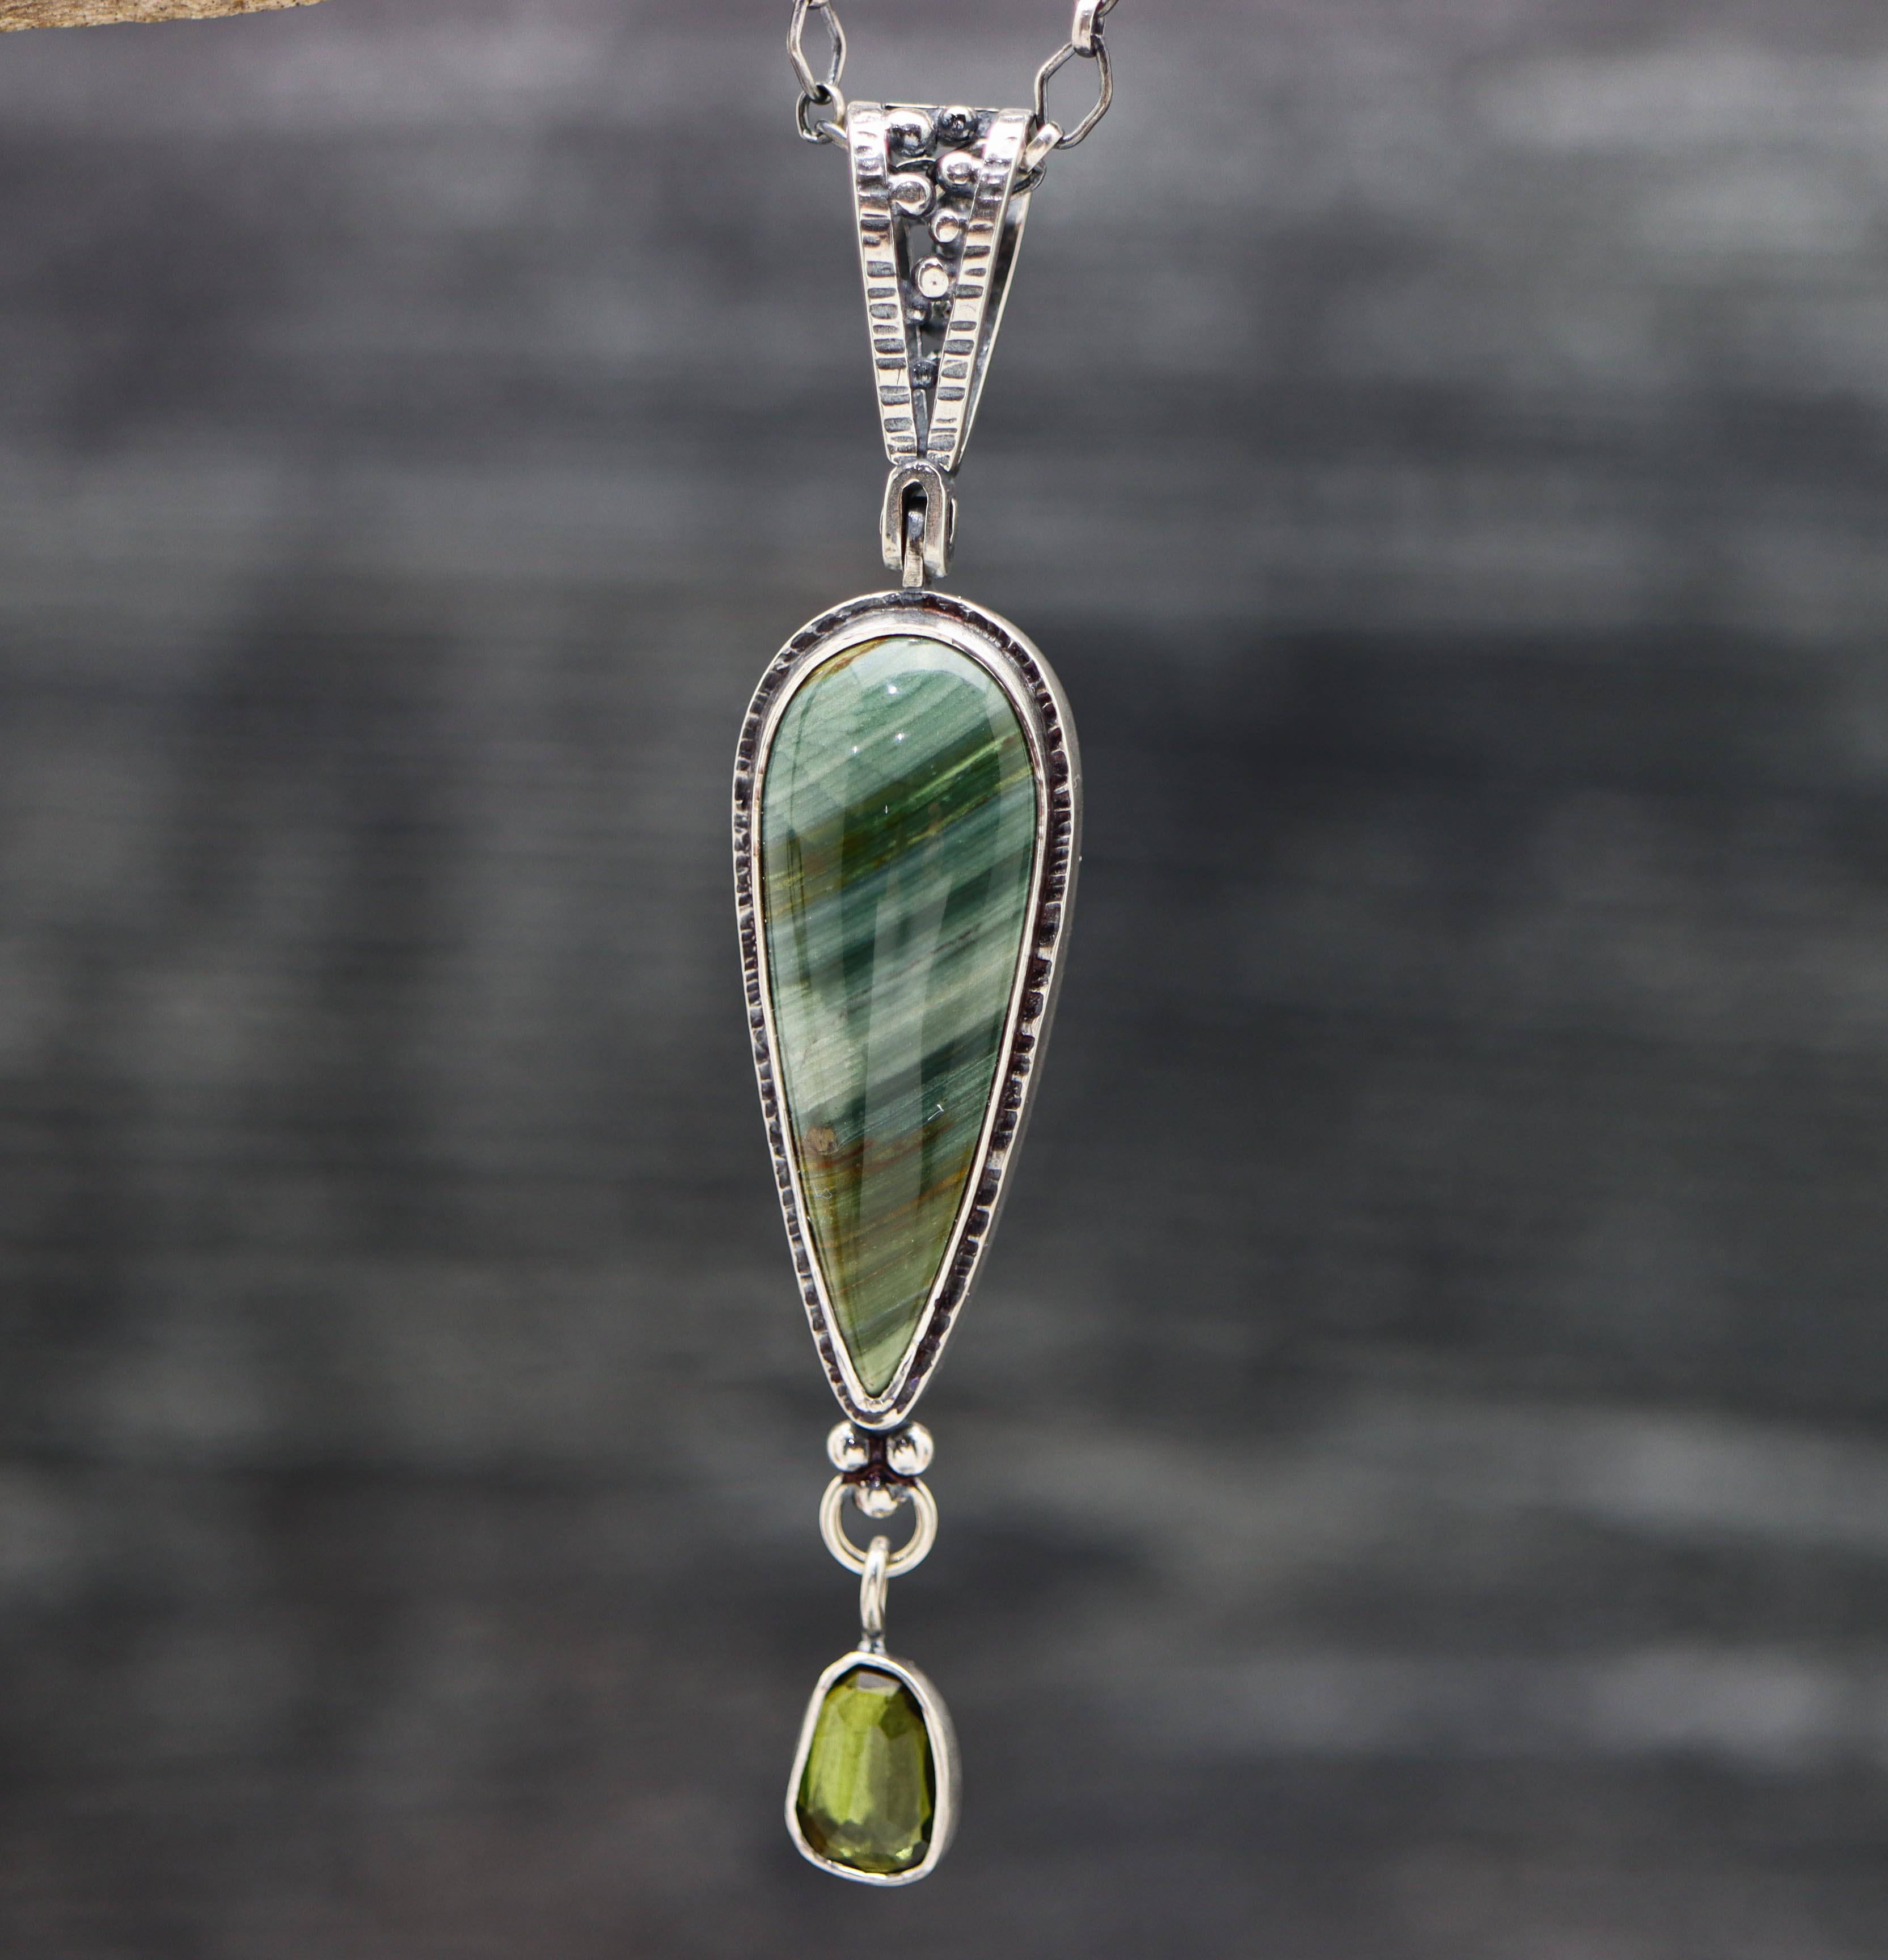 Caldera Paint and Green Tourmaline Pendant Sterling Silver One Of a Kind Gemstone Necklace